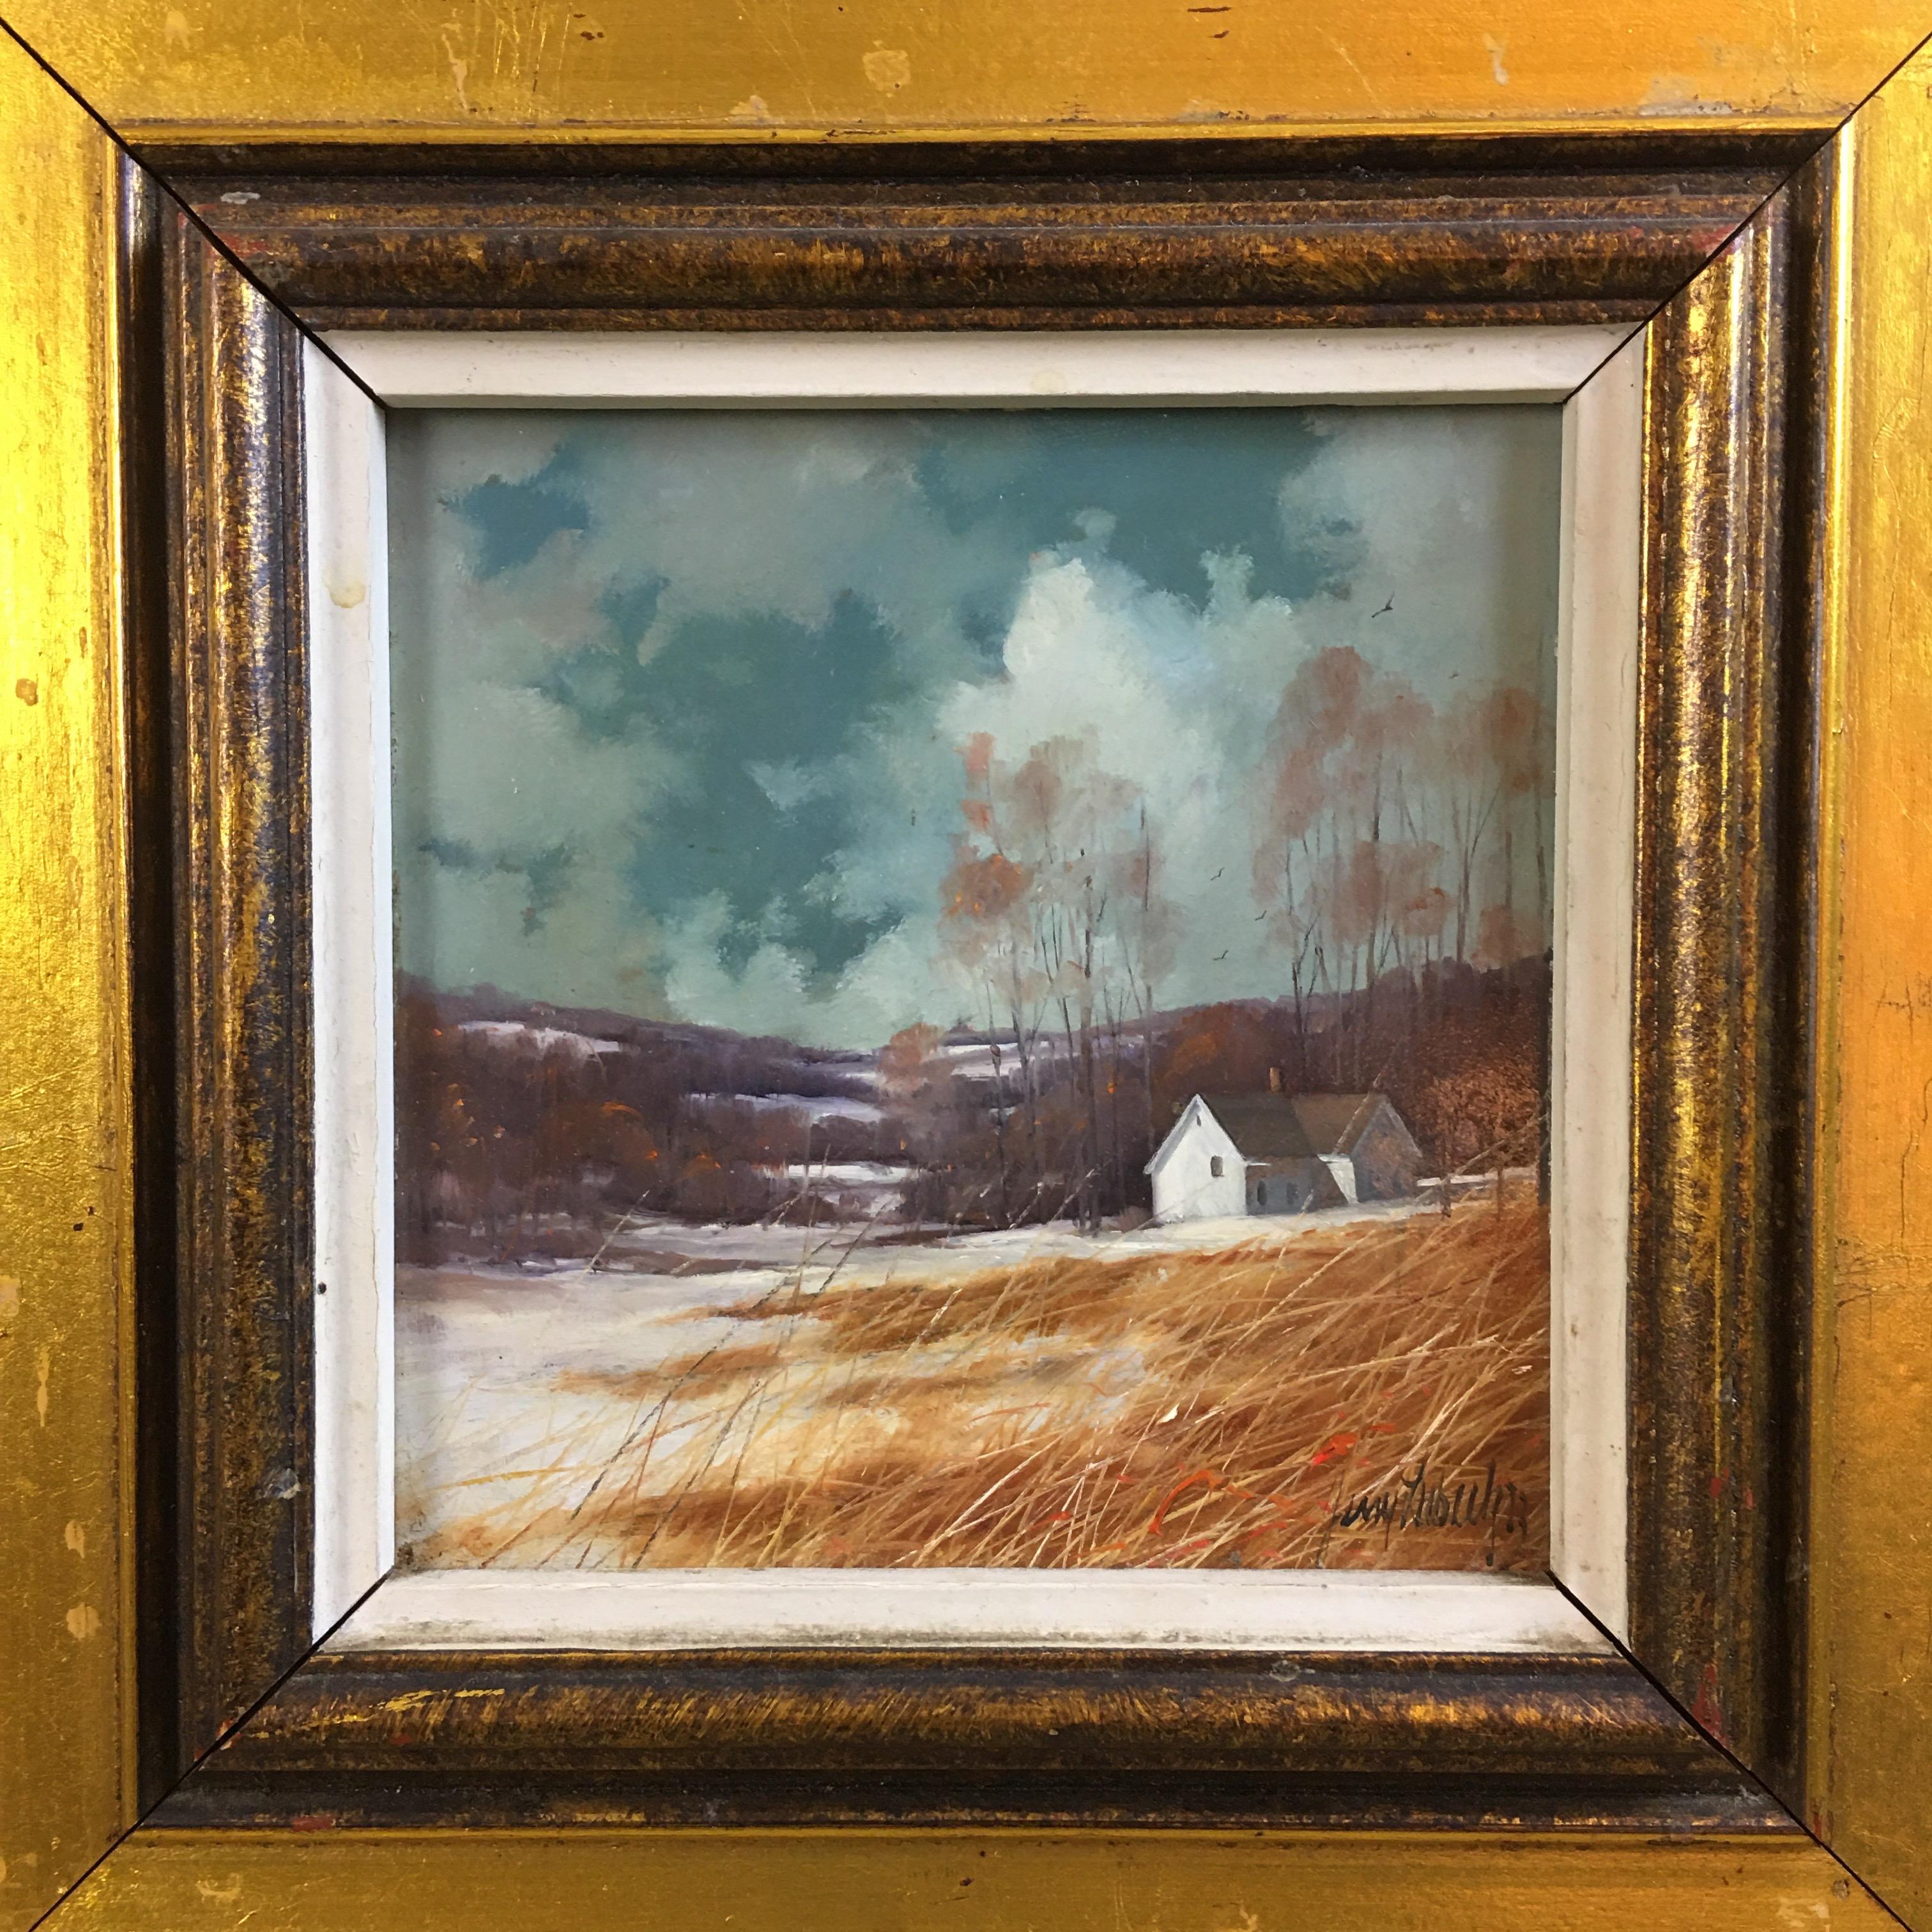 Gerald lubeck oil on masonite landscape. Great little painting that depicts a farmhouse on a winter day with snow in the fields. Signed bottom right. Painting measures: 5.5 square, with frame 10.5 square.